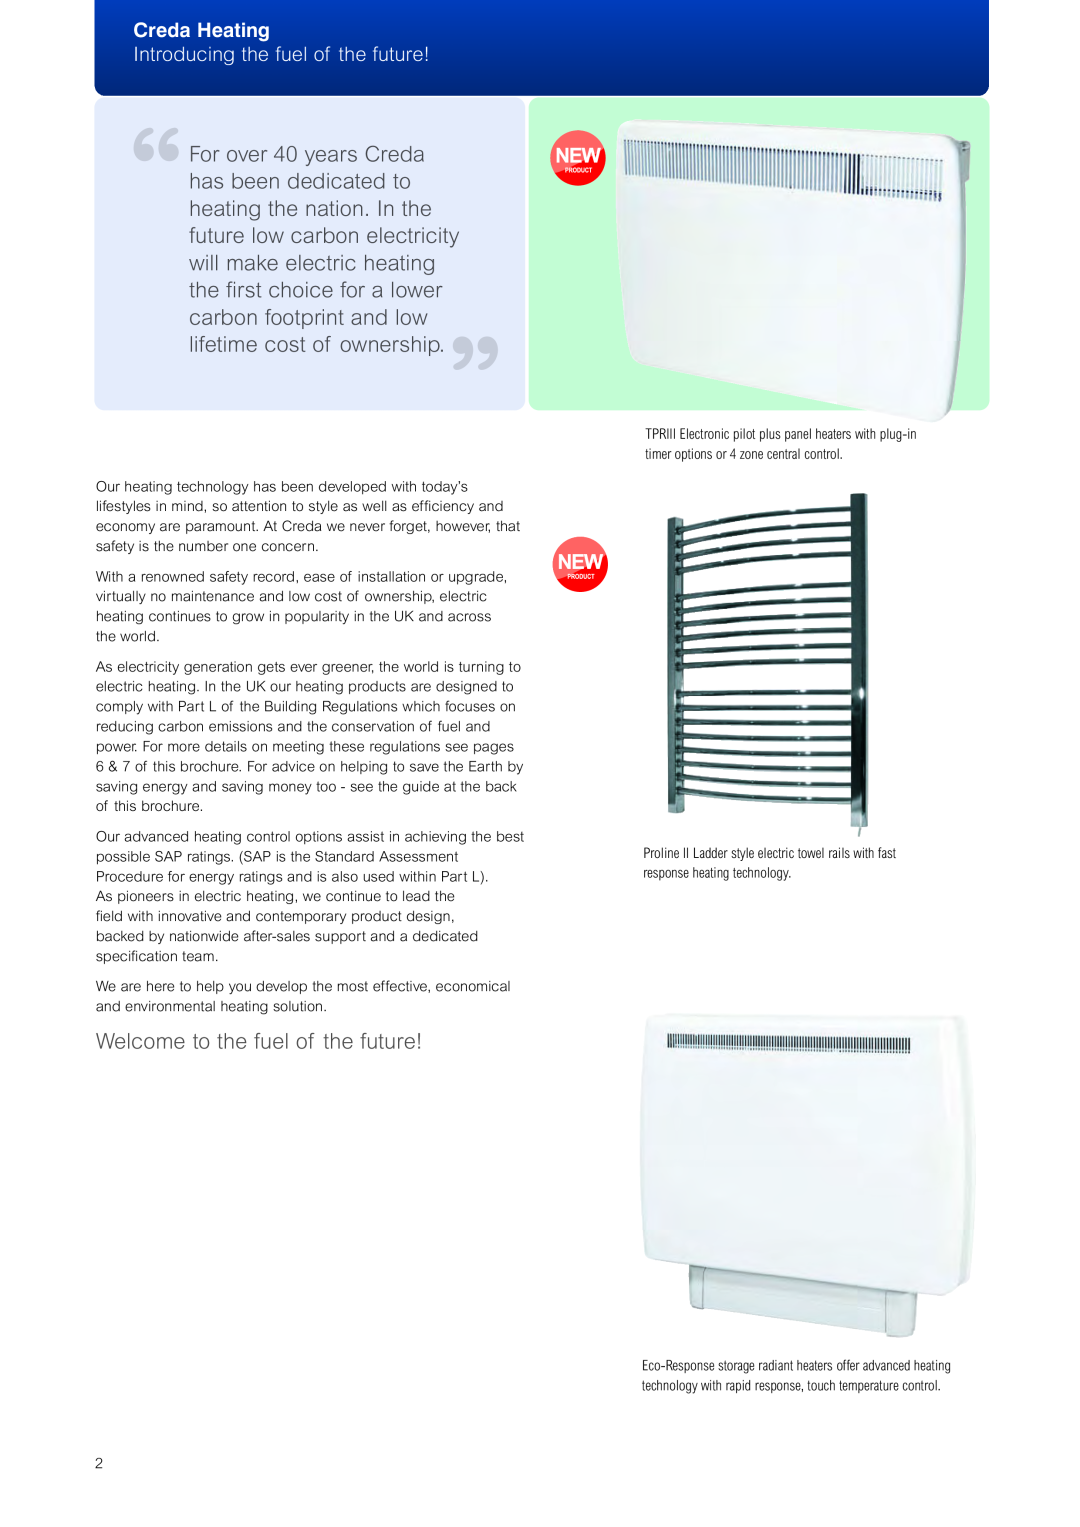 Creda Heating Solution manual Welcome to the fuel of the future, Creda Heating, Introducing the fuel of the future 